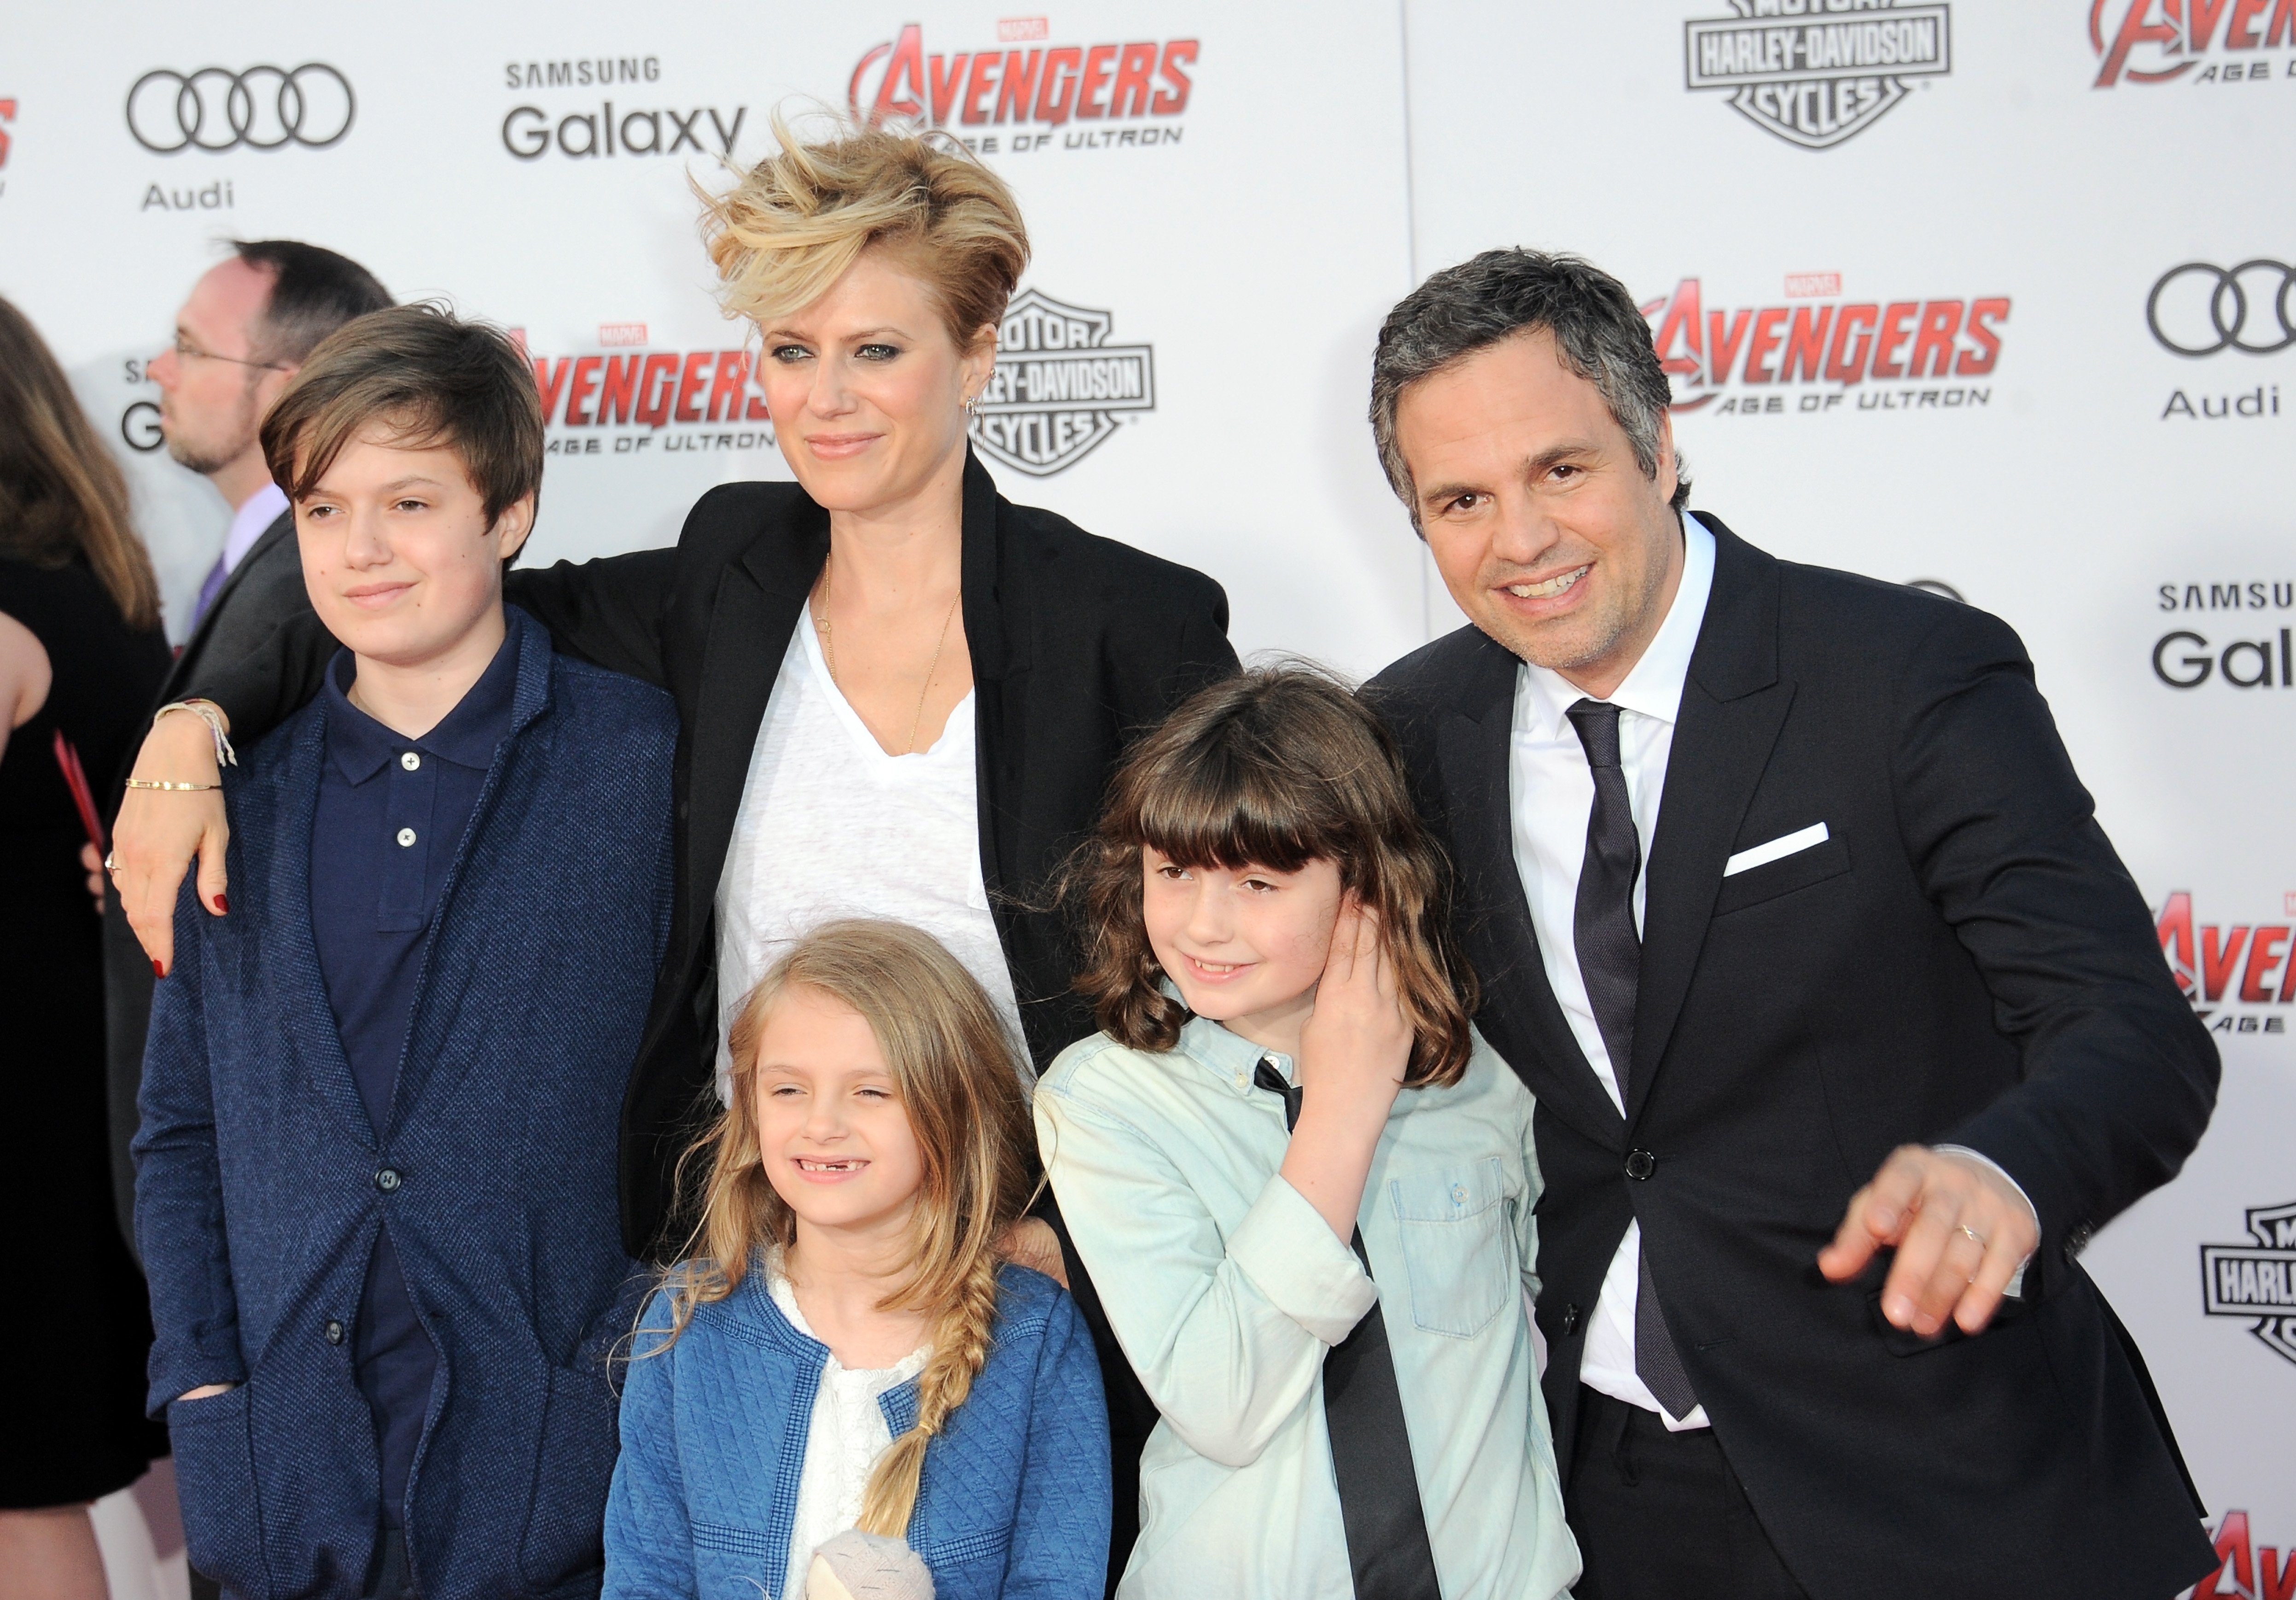 Actor Mark Ruffalo and wife, Sunrise Coigney with children, Keen Ruffalo, Bella Ruffalo and Odette Ruffalo at the Premiere Of Marvel's "Avengers Age Of Ultron" held at Dolby Theatre on April 13, 2015, in Hollywood, California. | Source: Getty Images